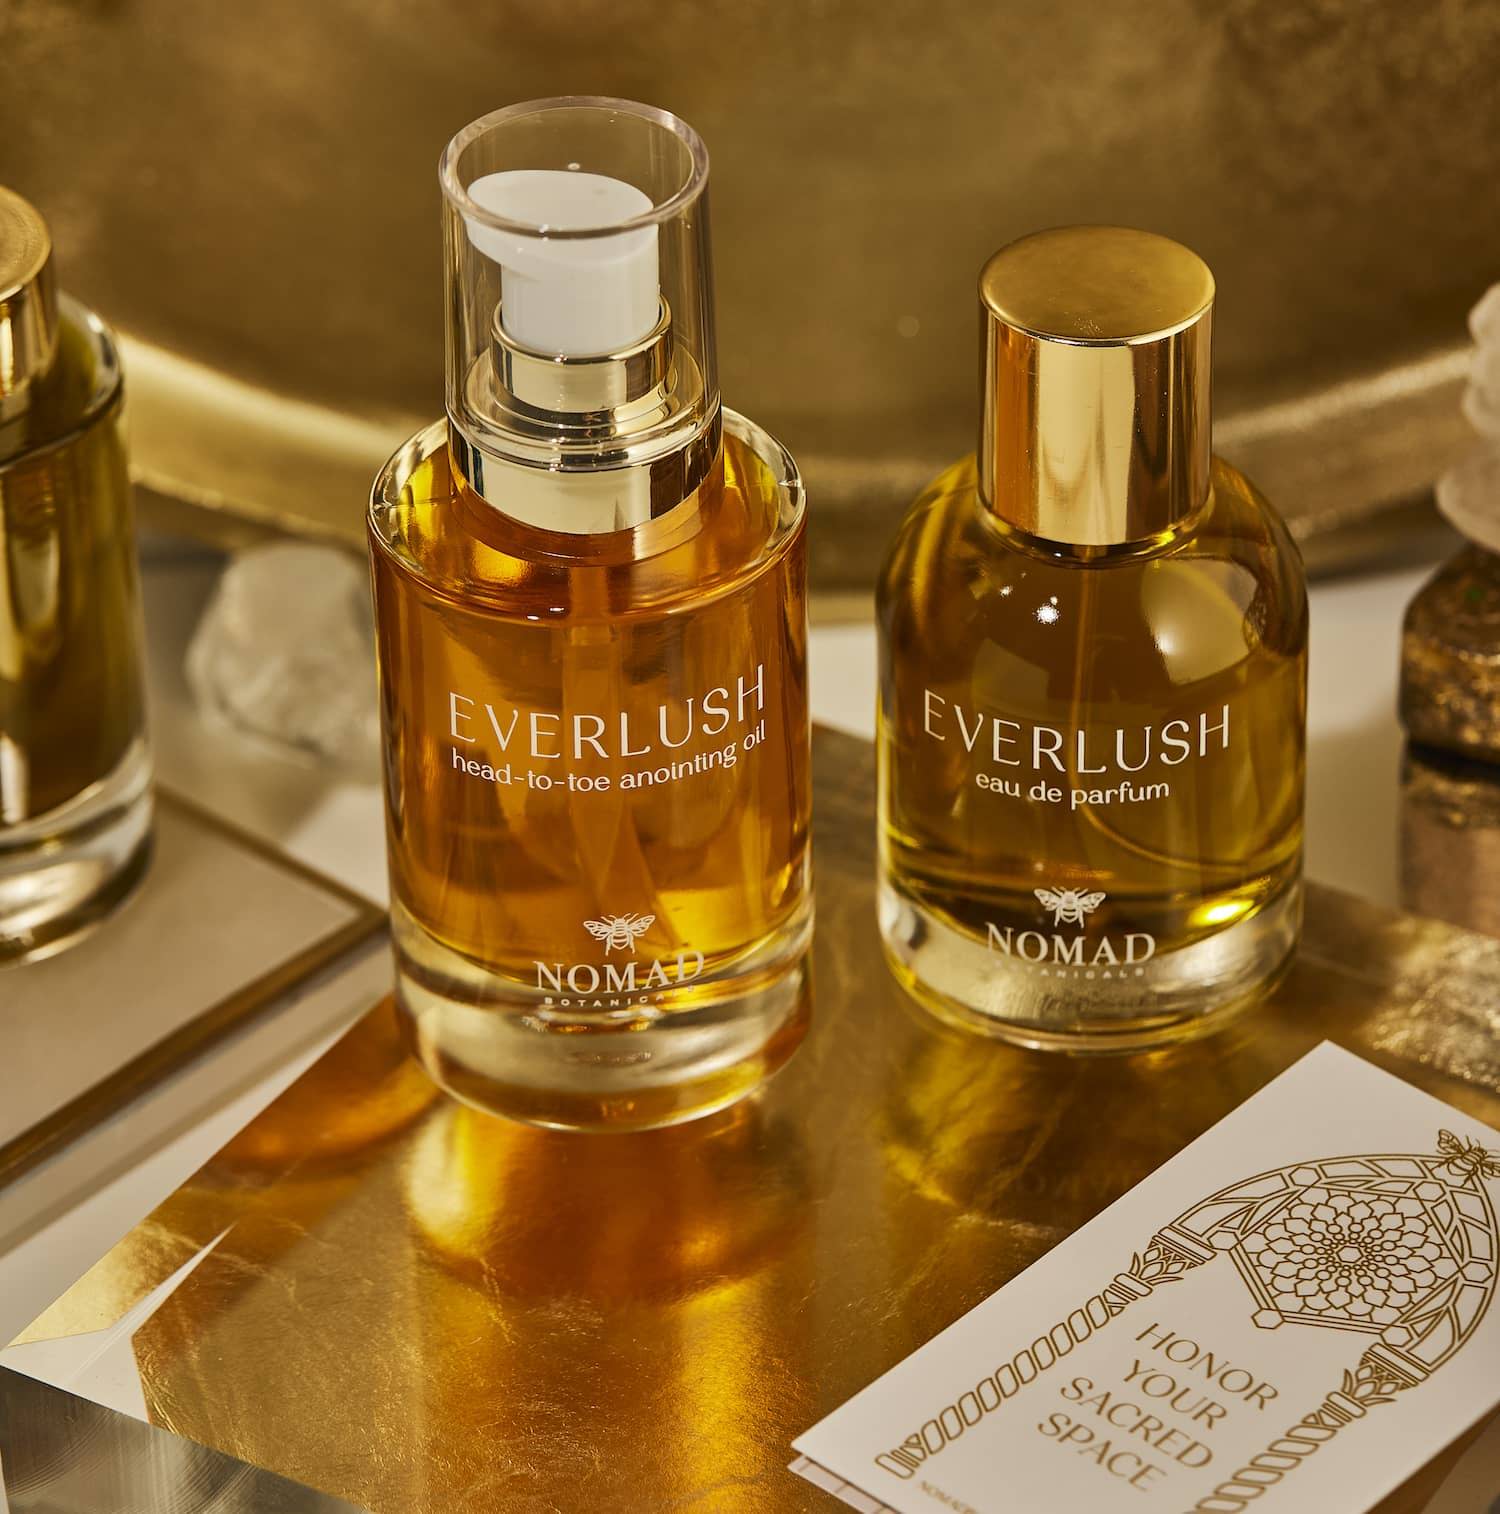 Everlush Anointing Oil and Eau de Parfum on a vanity